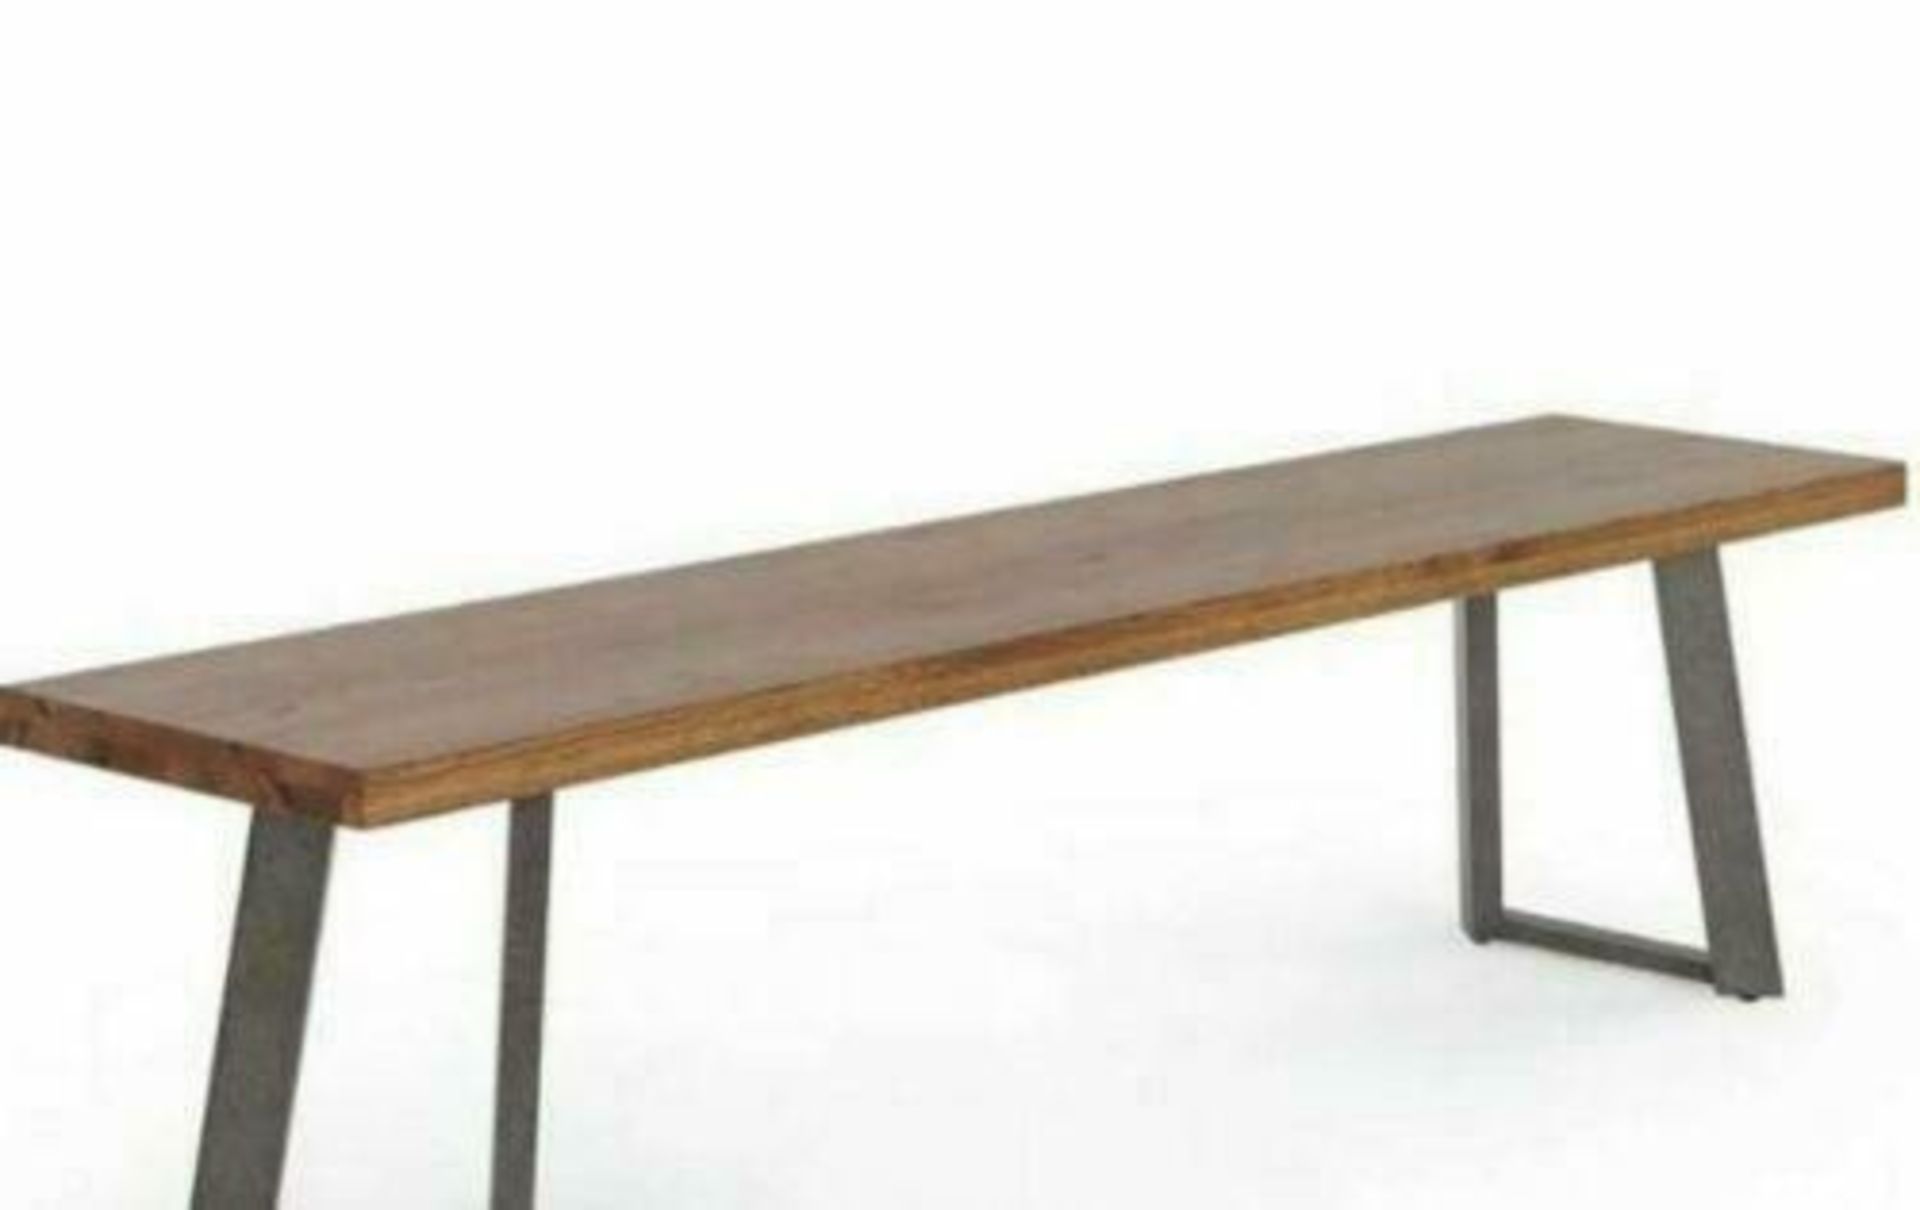 New Boxed - Cantilever Rustic Solid Oak & Metal Bench. 180cm Long. RRP £330 EACH. (ROW17) For a more